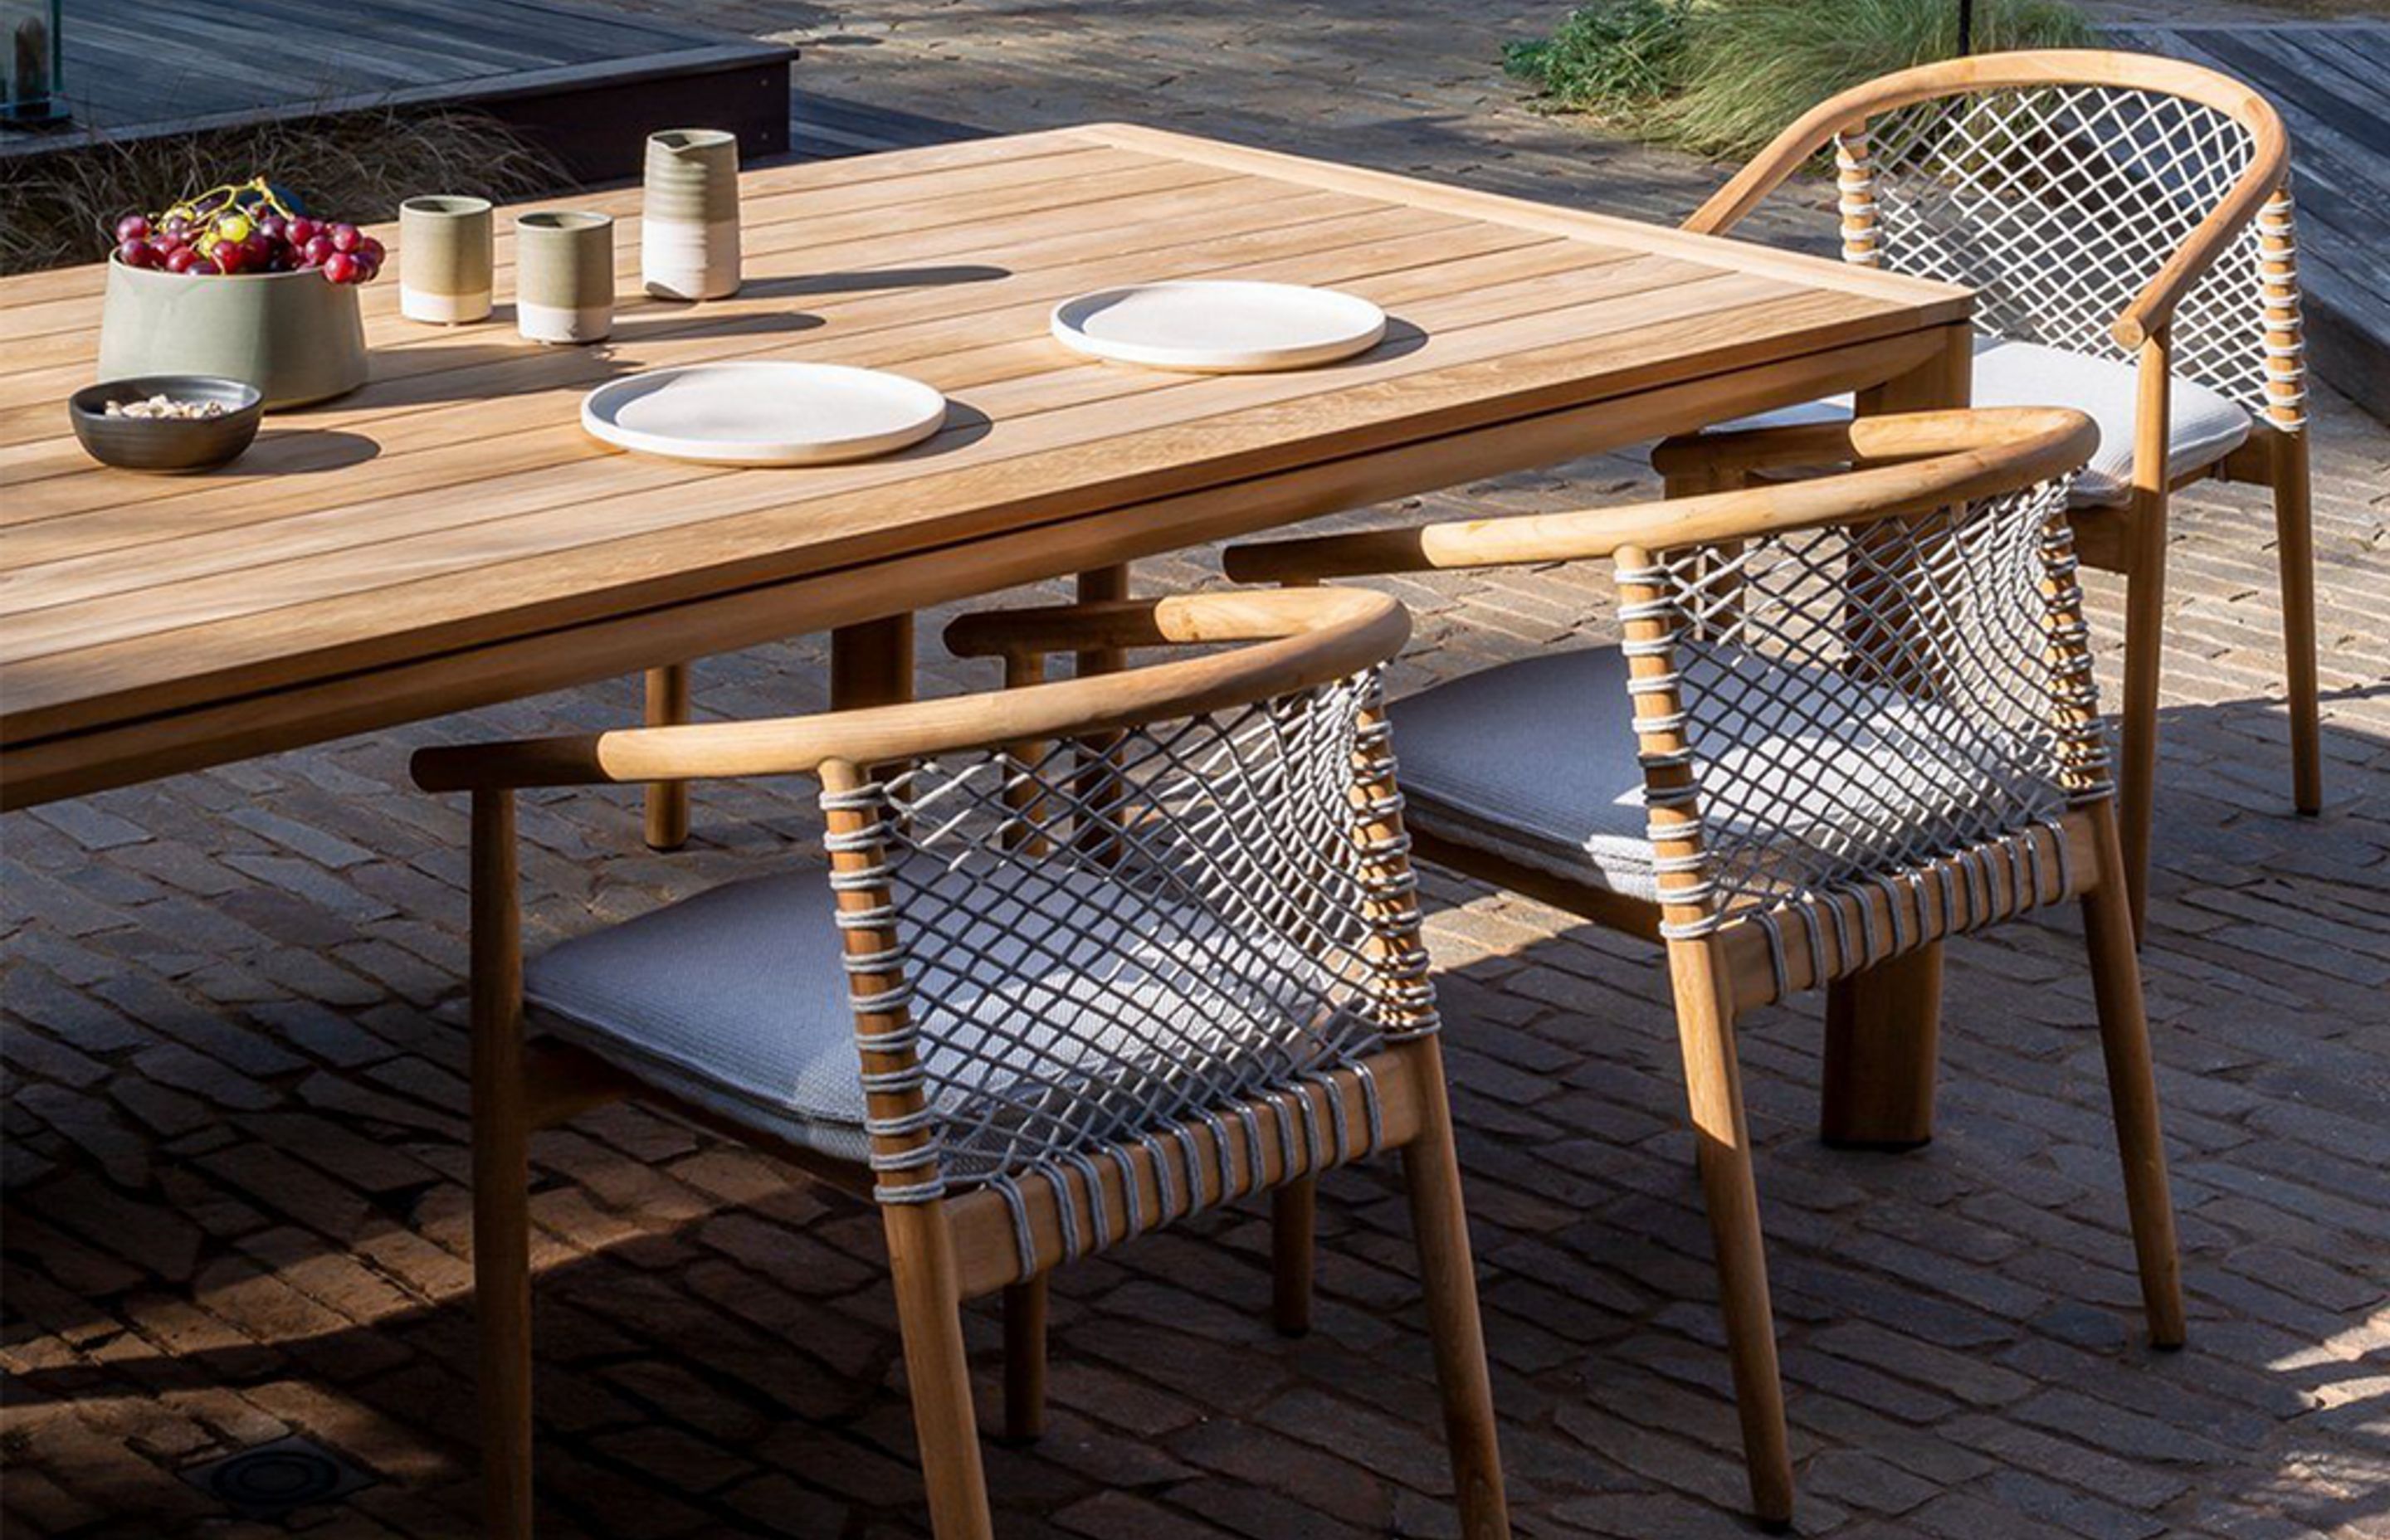 Pictured: Addis Teak Dining Table and Forrest Armchairs by Kett.